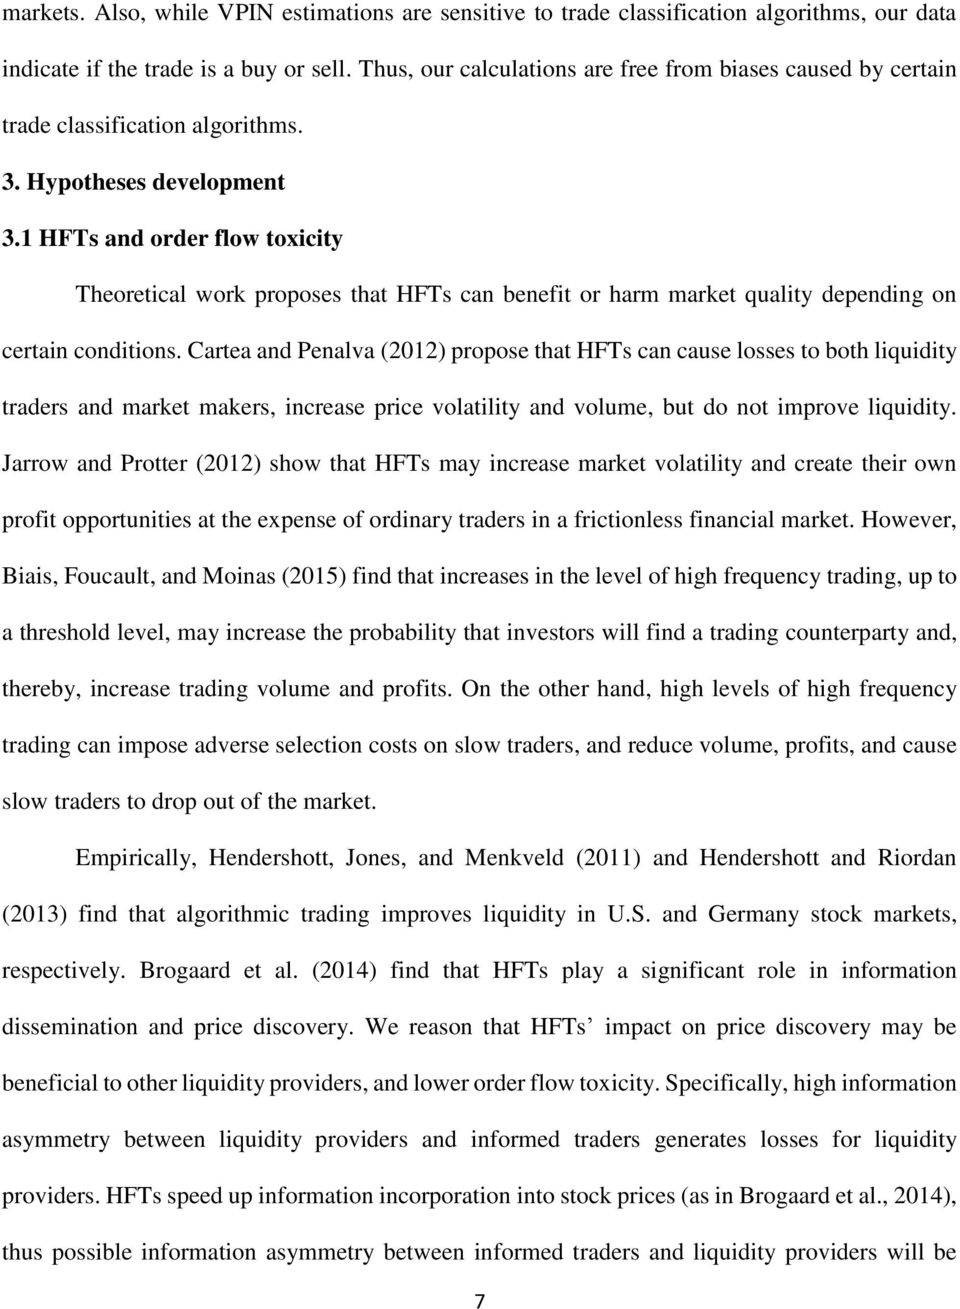 1 HFTs and order flow toxicity Theoretical work proposes that HFTs can benefit or harm market quality depending on certain conditions.